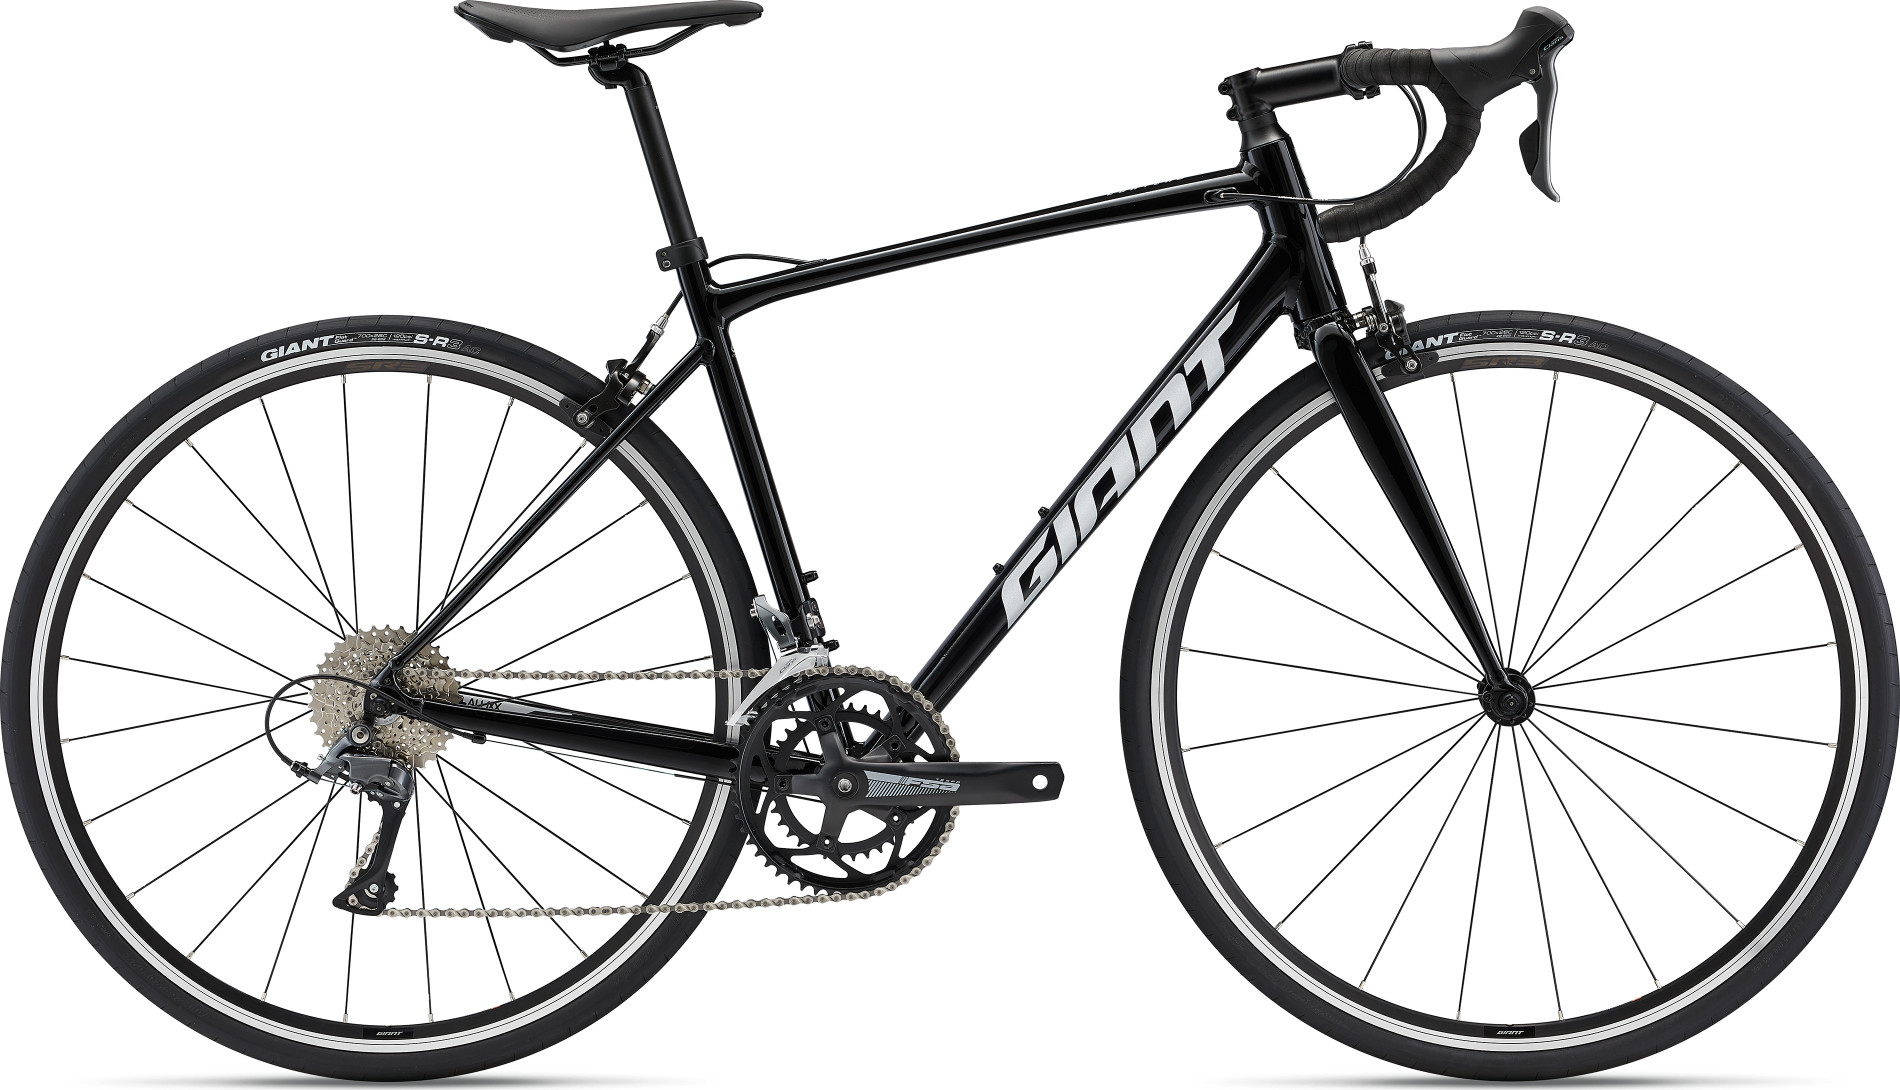 Black Giant Contend 3 road bike with rim brakes and Shimano Claris groupset